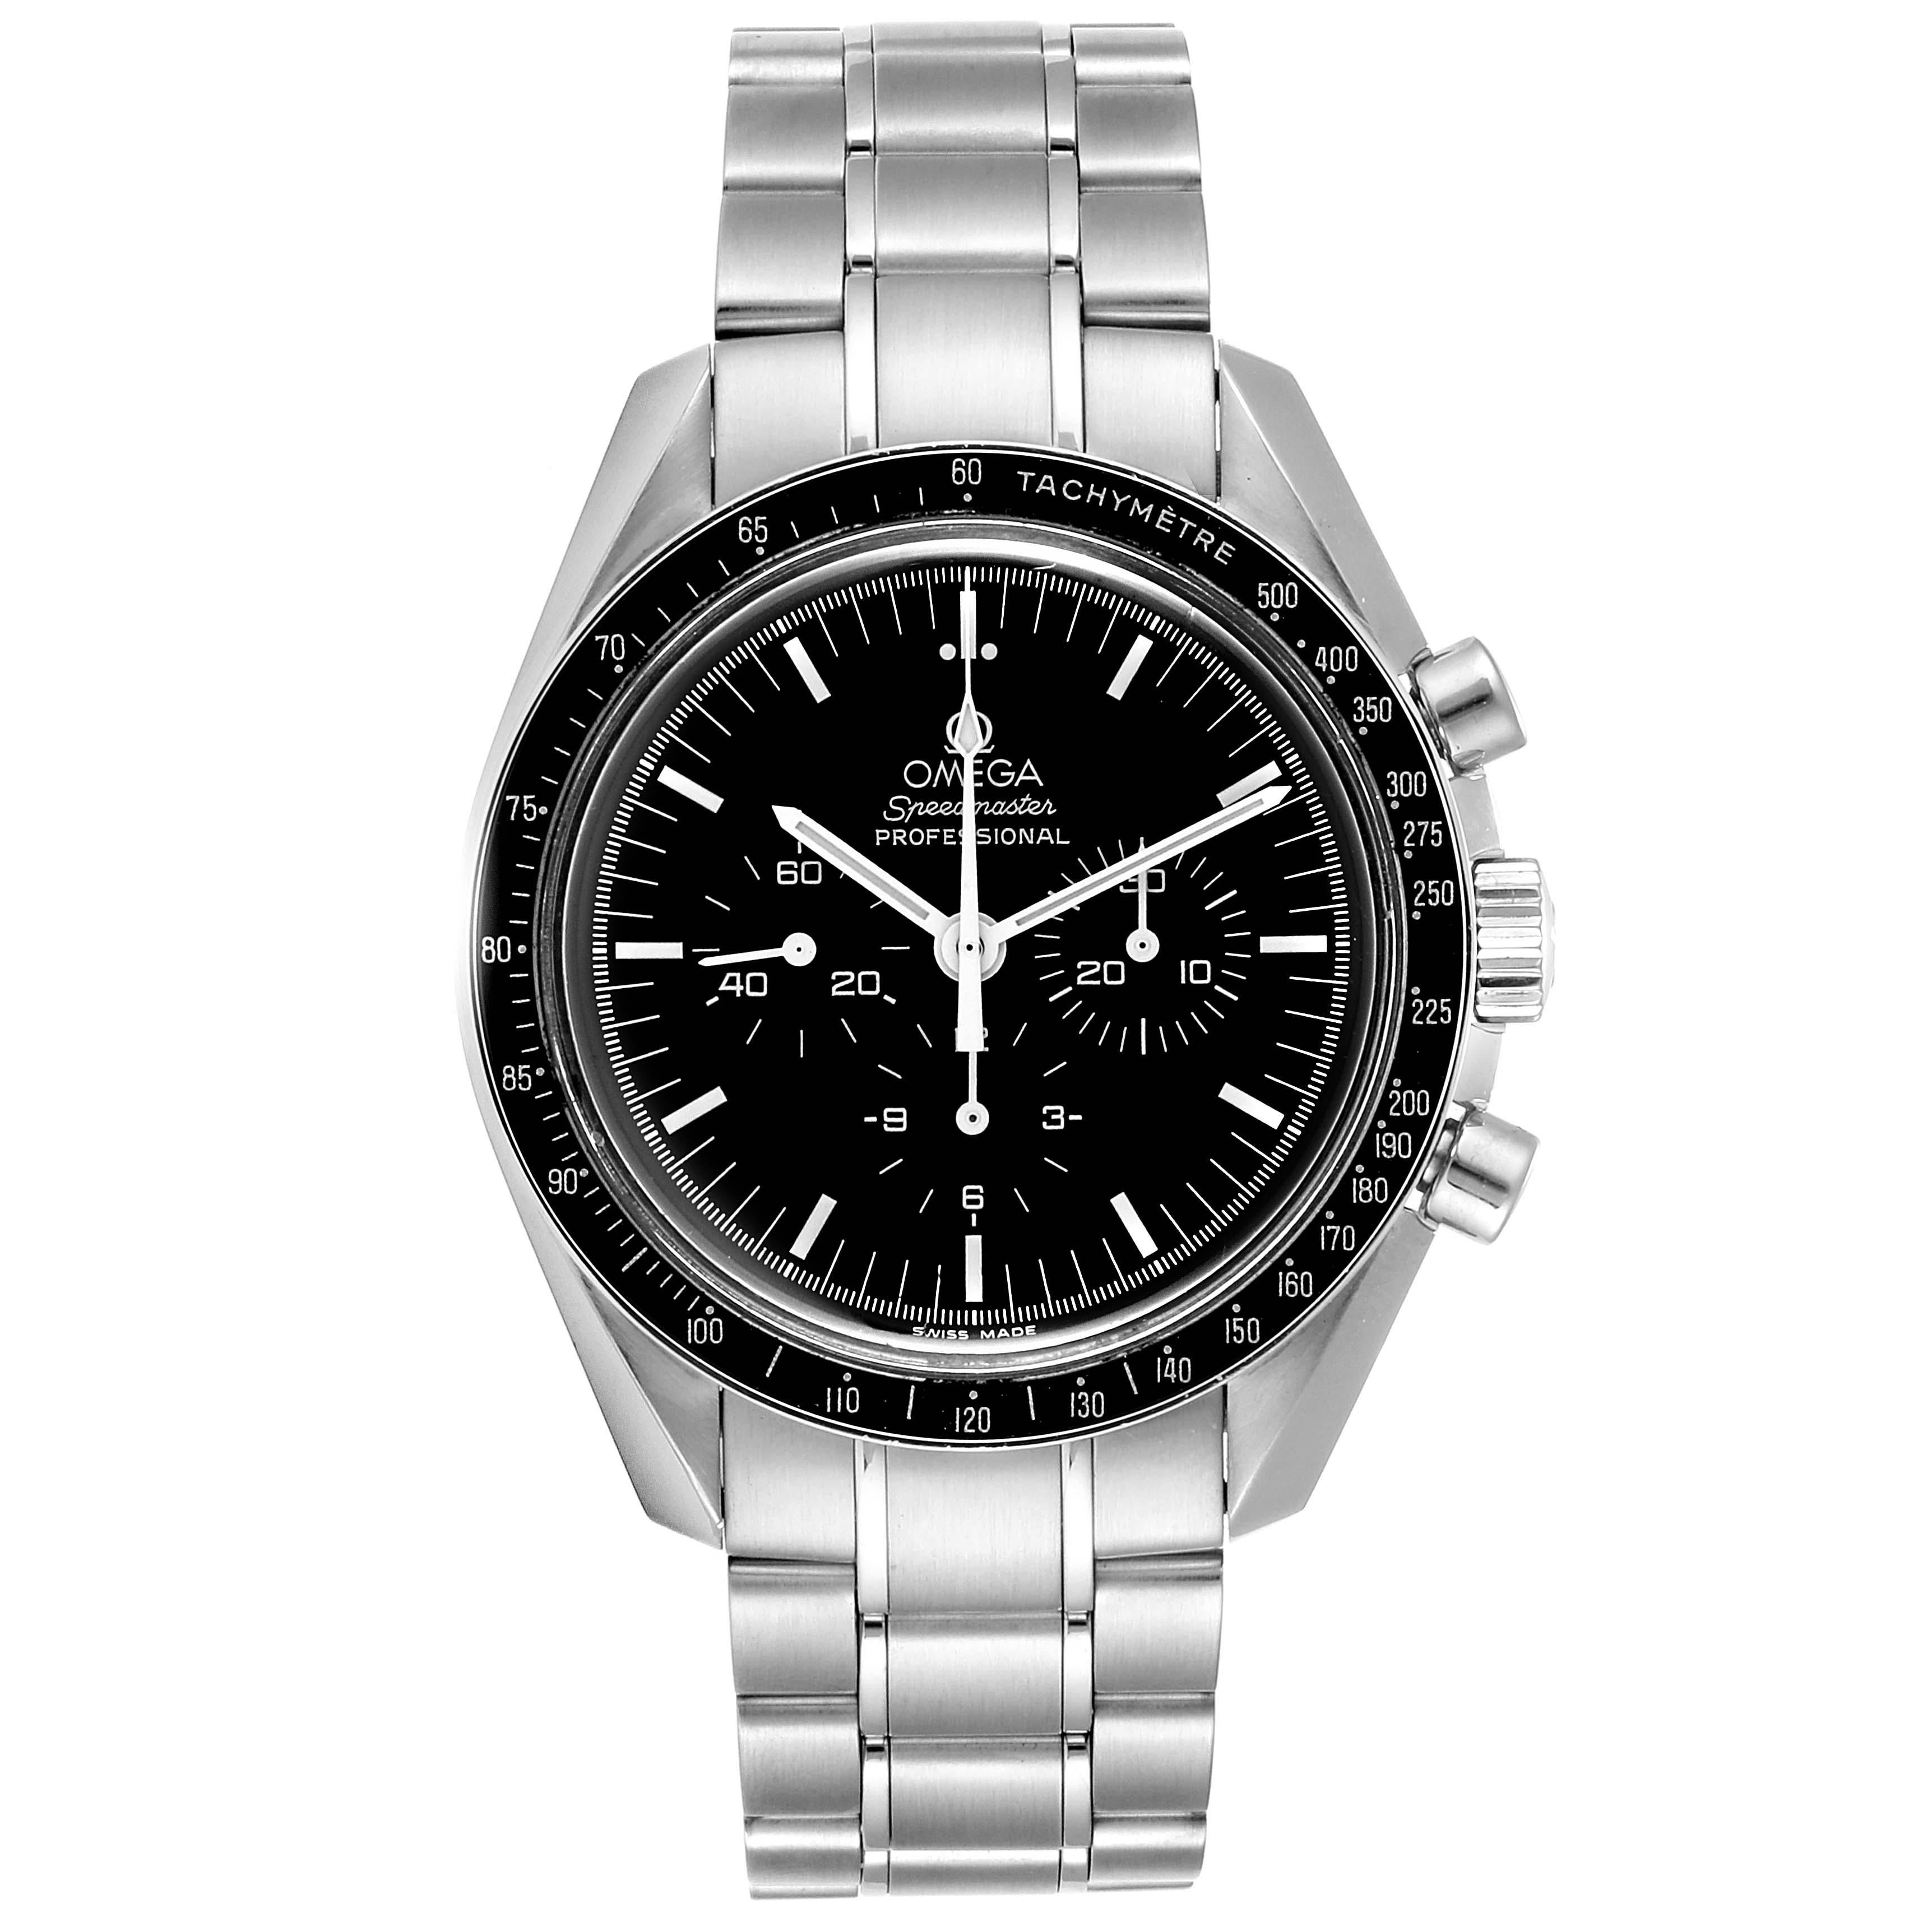 Omega Speedmaster Chronograph Mens MoonWatch 3570.50.00 Box Card. Manual winding chronograph movement. Stainless steel round case 42.0 mm in diameter. Stainless steel bezel with tachymetre function. Hesalite crystal. Black dial with indexes and